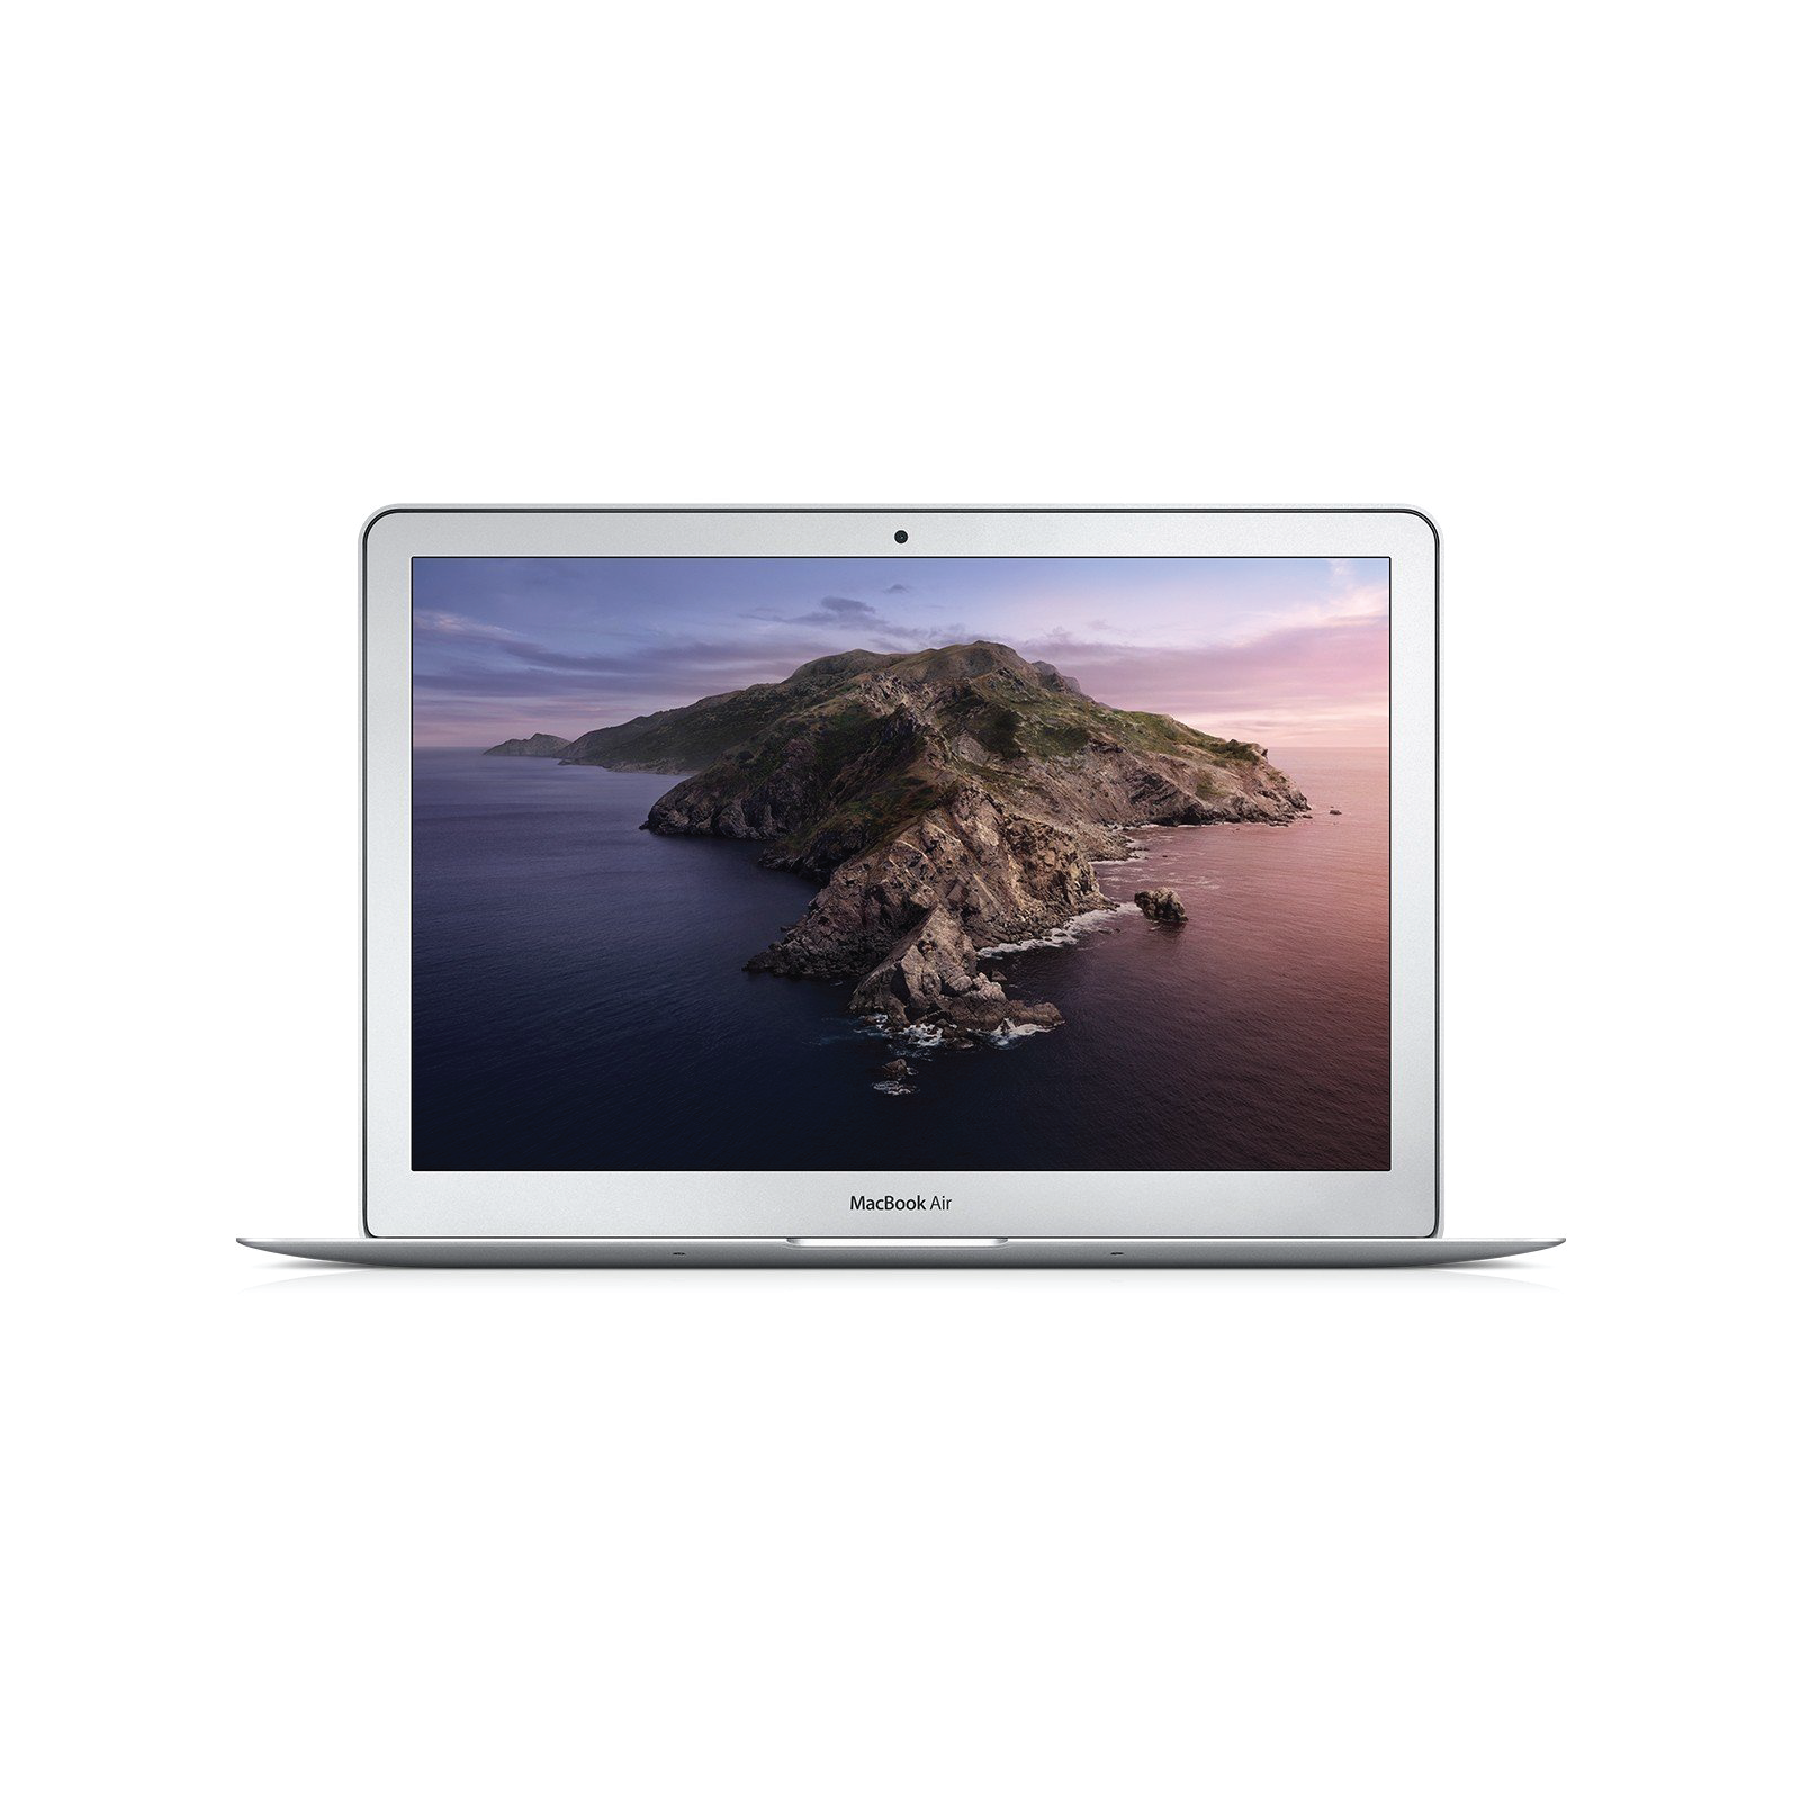 MacBook Air (13-inch, 2017) 1.8GHz, Intel Core i5 128GB - Silver (Good) - iStore Pre-owned